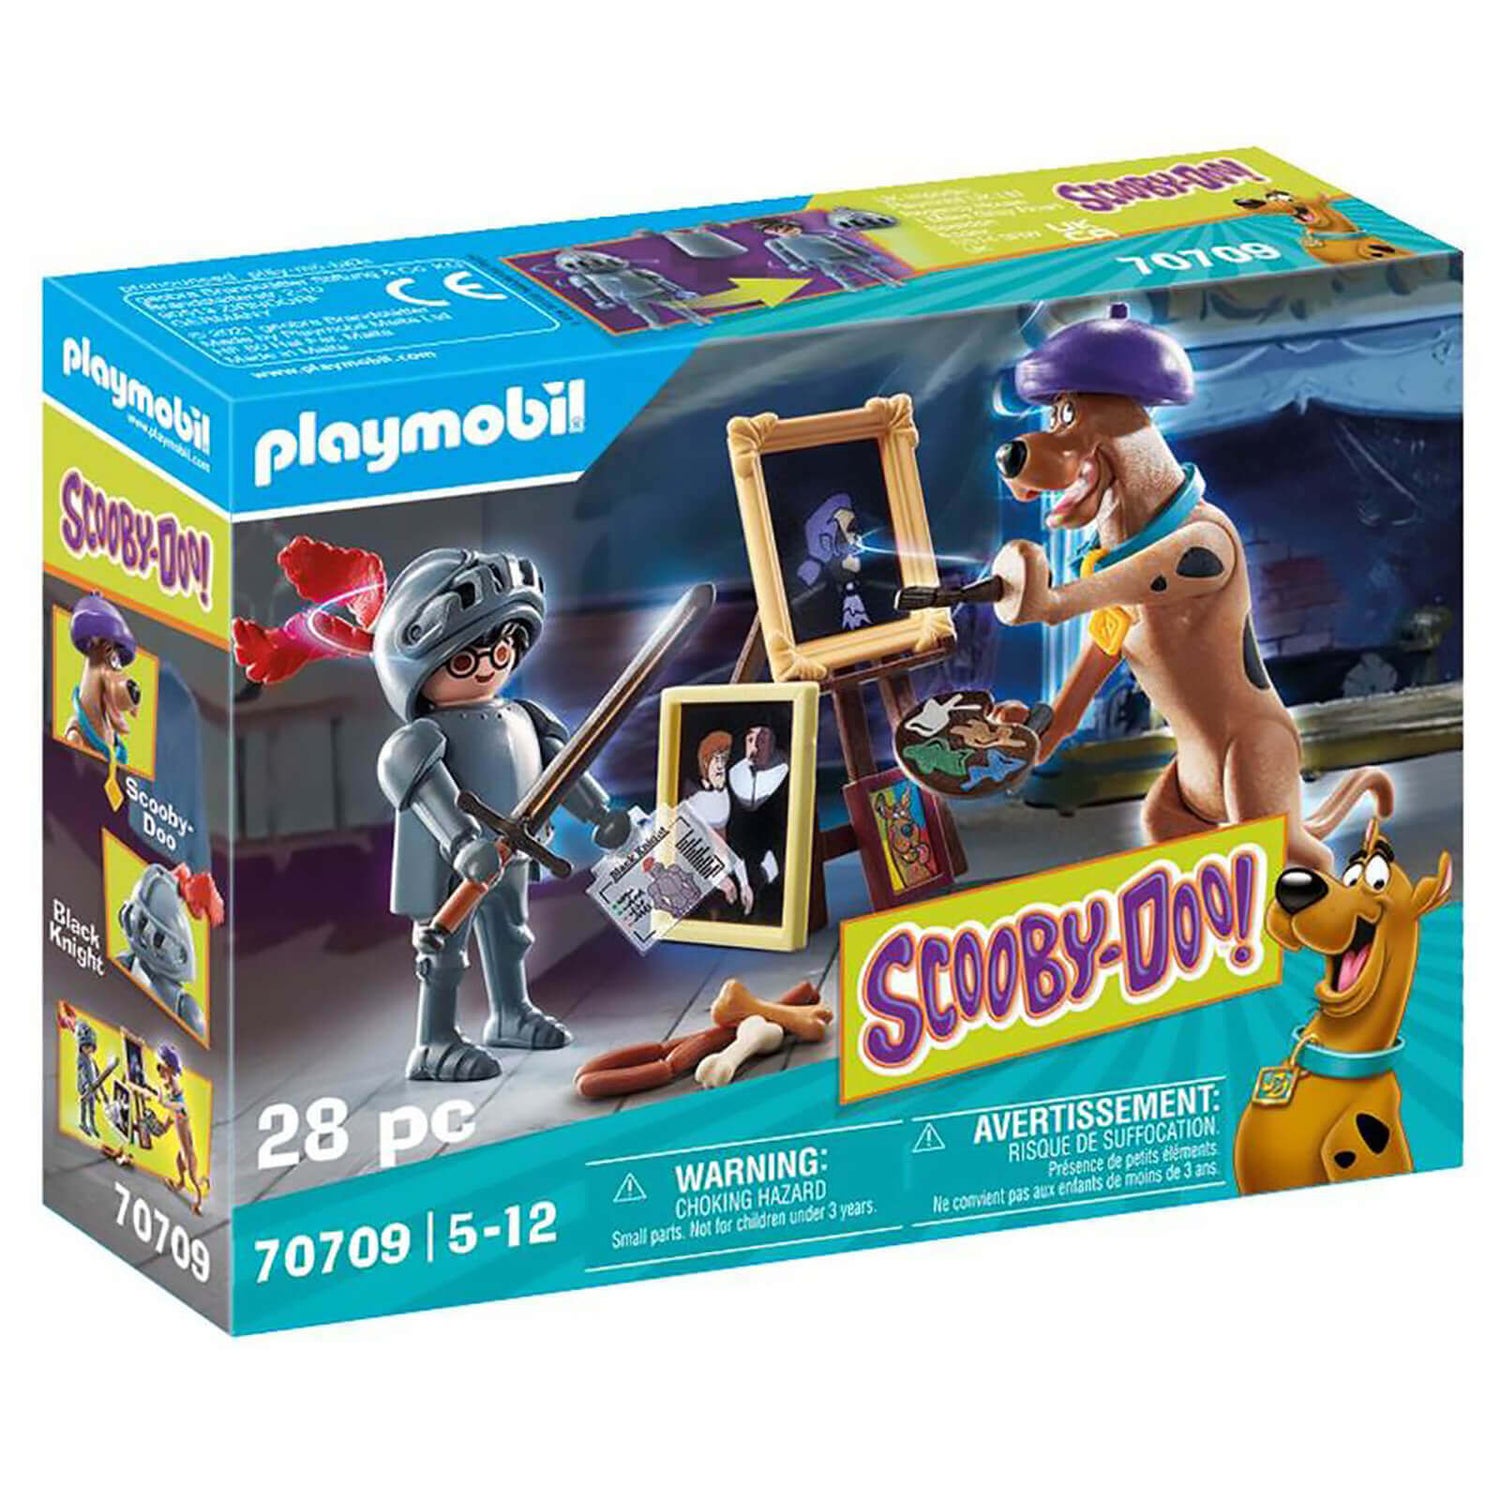 Playmobil SCOOBY-DOO! Adventure with Black Knight (70709)